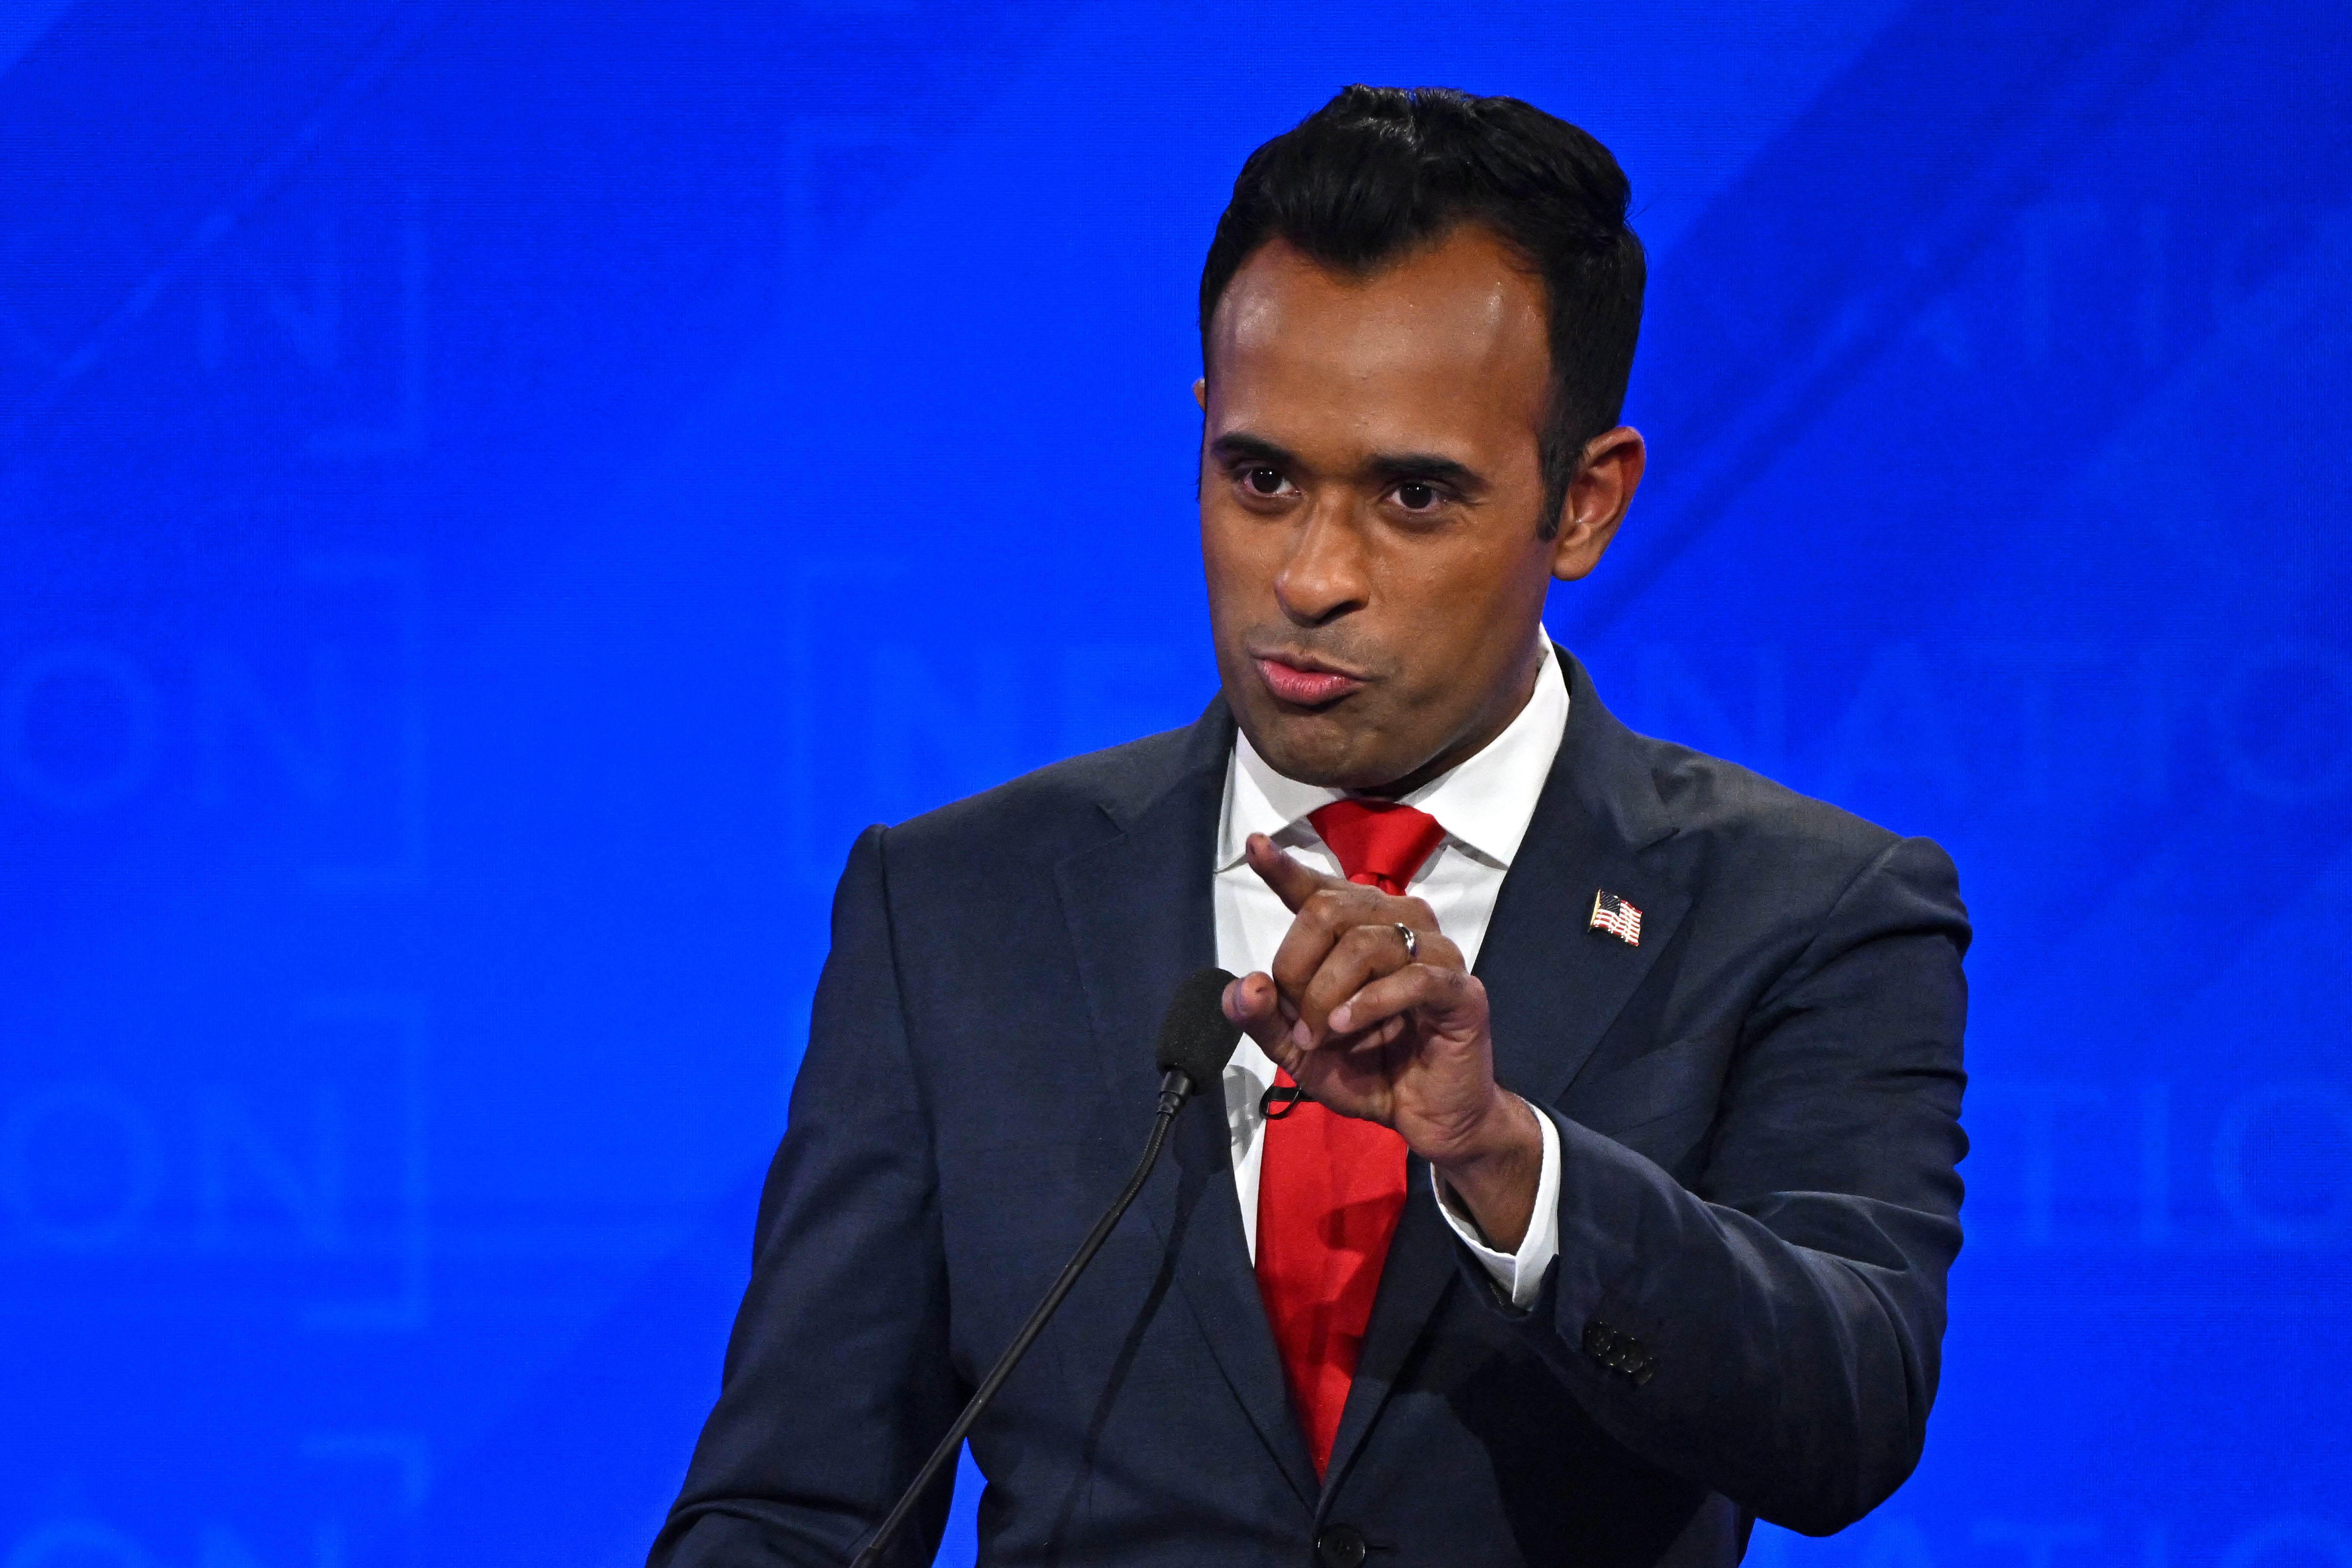 Entrepreneur Vivek Ramaswamy gestures as he speaks during the fourth Republican presidential primary debate at the University of Alabama in Tuscaloosa, Alabama, on 6 December